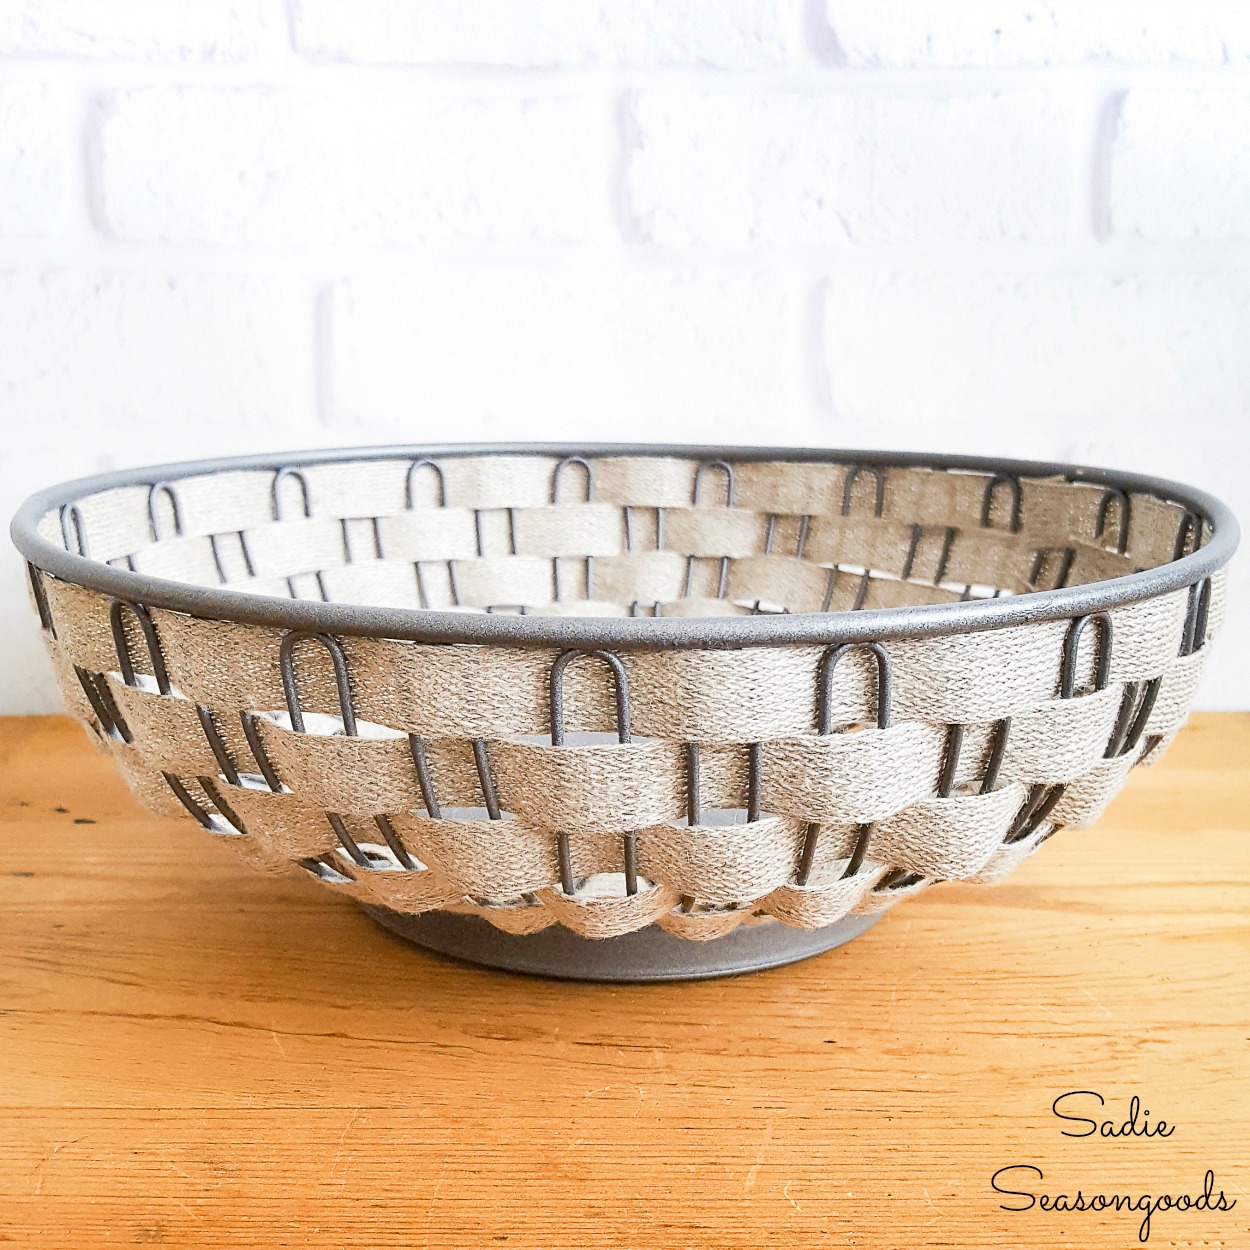 https://www.sadieseasongoods.com/wp-content/uploads/2017/05/Vintage-farmhouse-decor-with-a-wire-bread-basket-and-galvanized-spray-paint.jpg